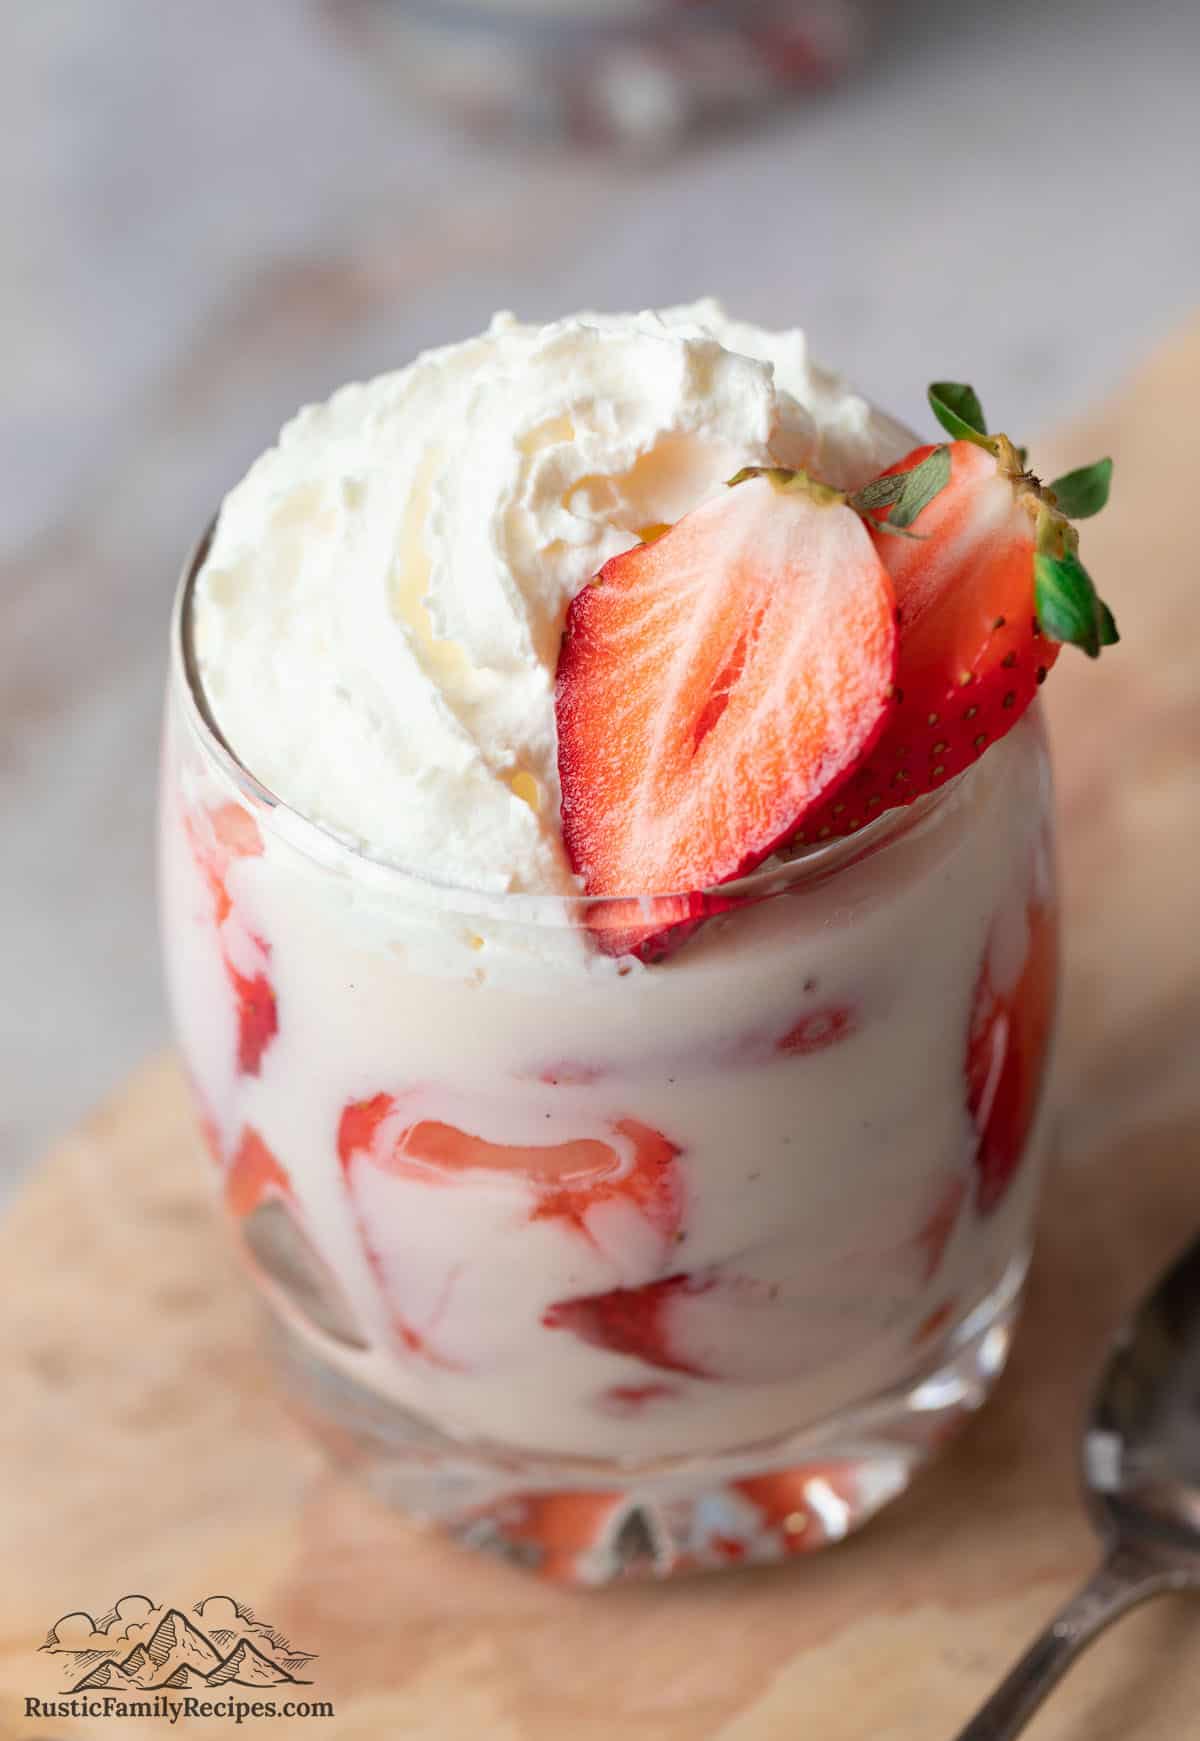 Strawberries, cream, whipped cream and a sliced berry in a glass